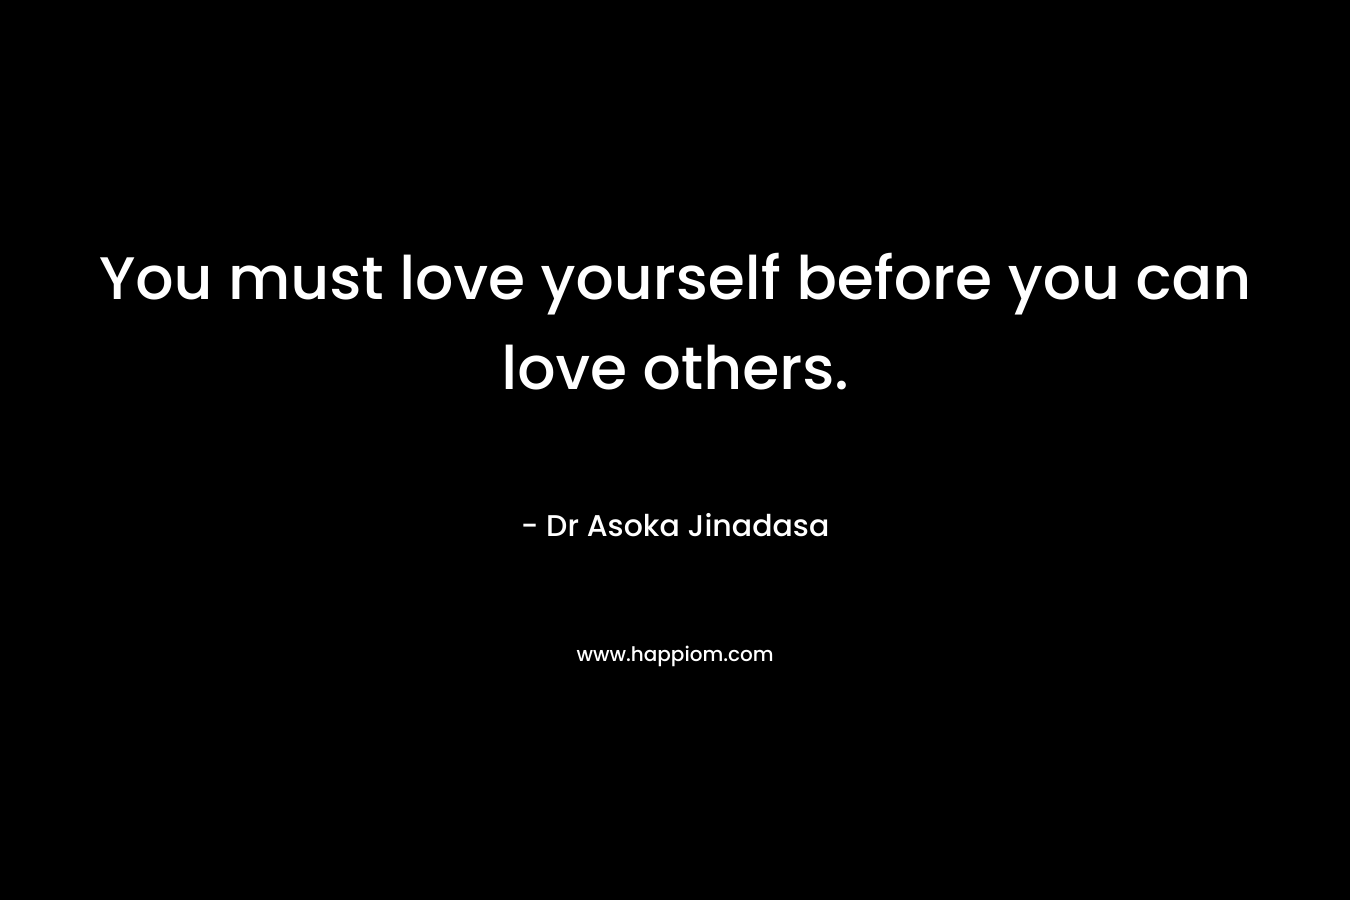 You must love yourself before you can love others. – Dr Asoka Jinadasa